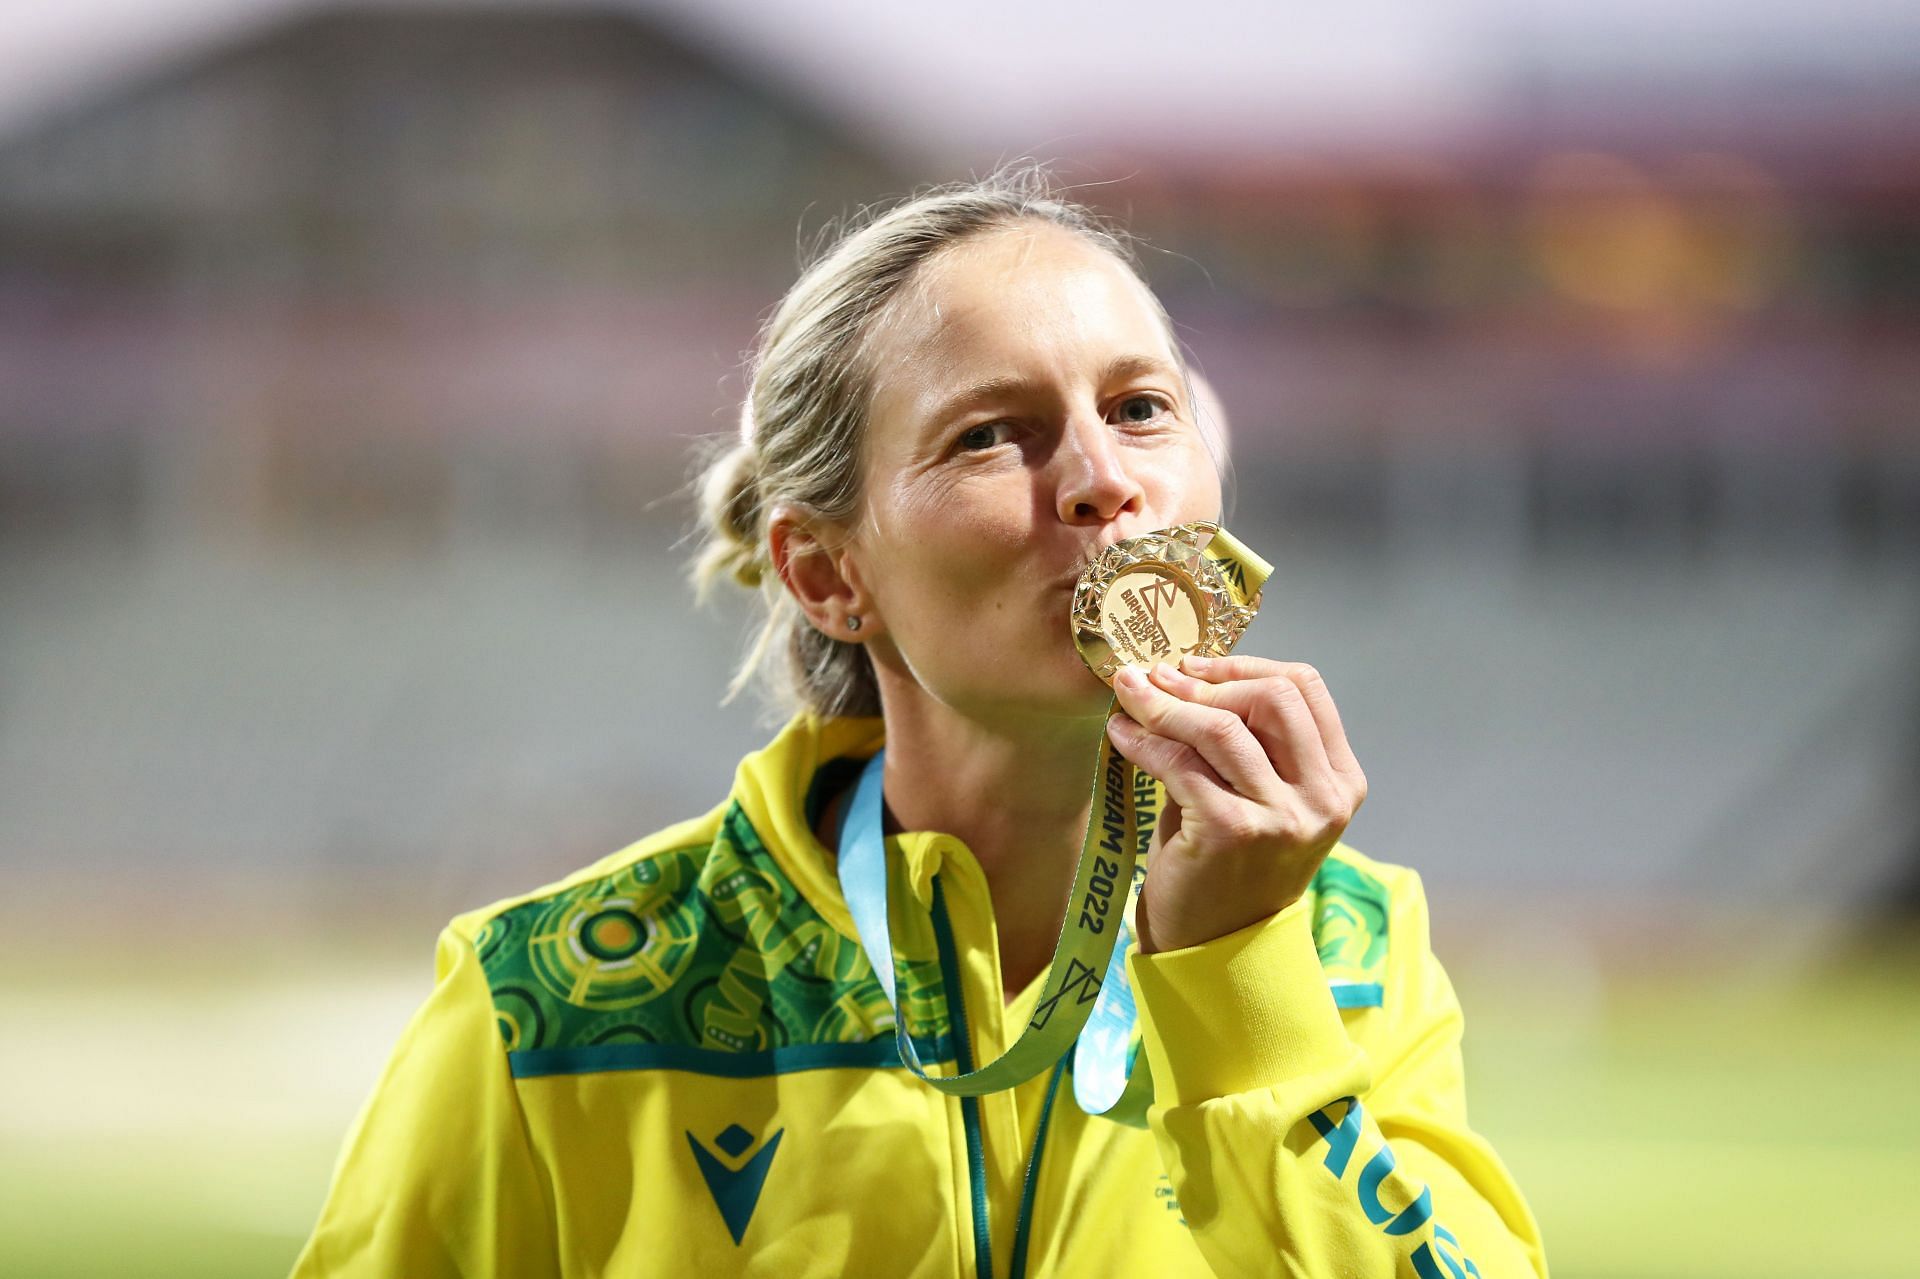 Meg Lanning led Australia Women to their first-ever Commonwealth Games gold medal (Image: Getty)